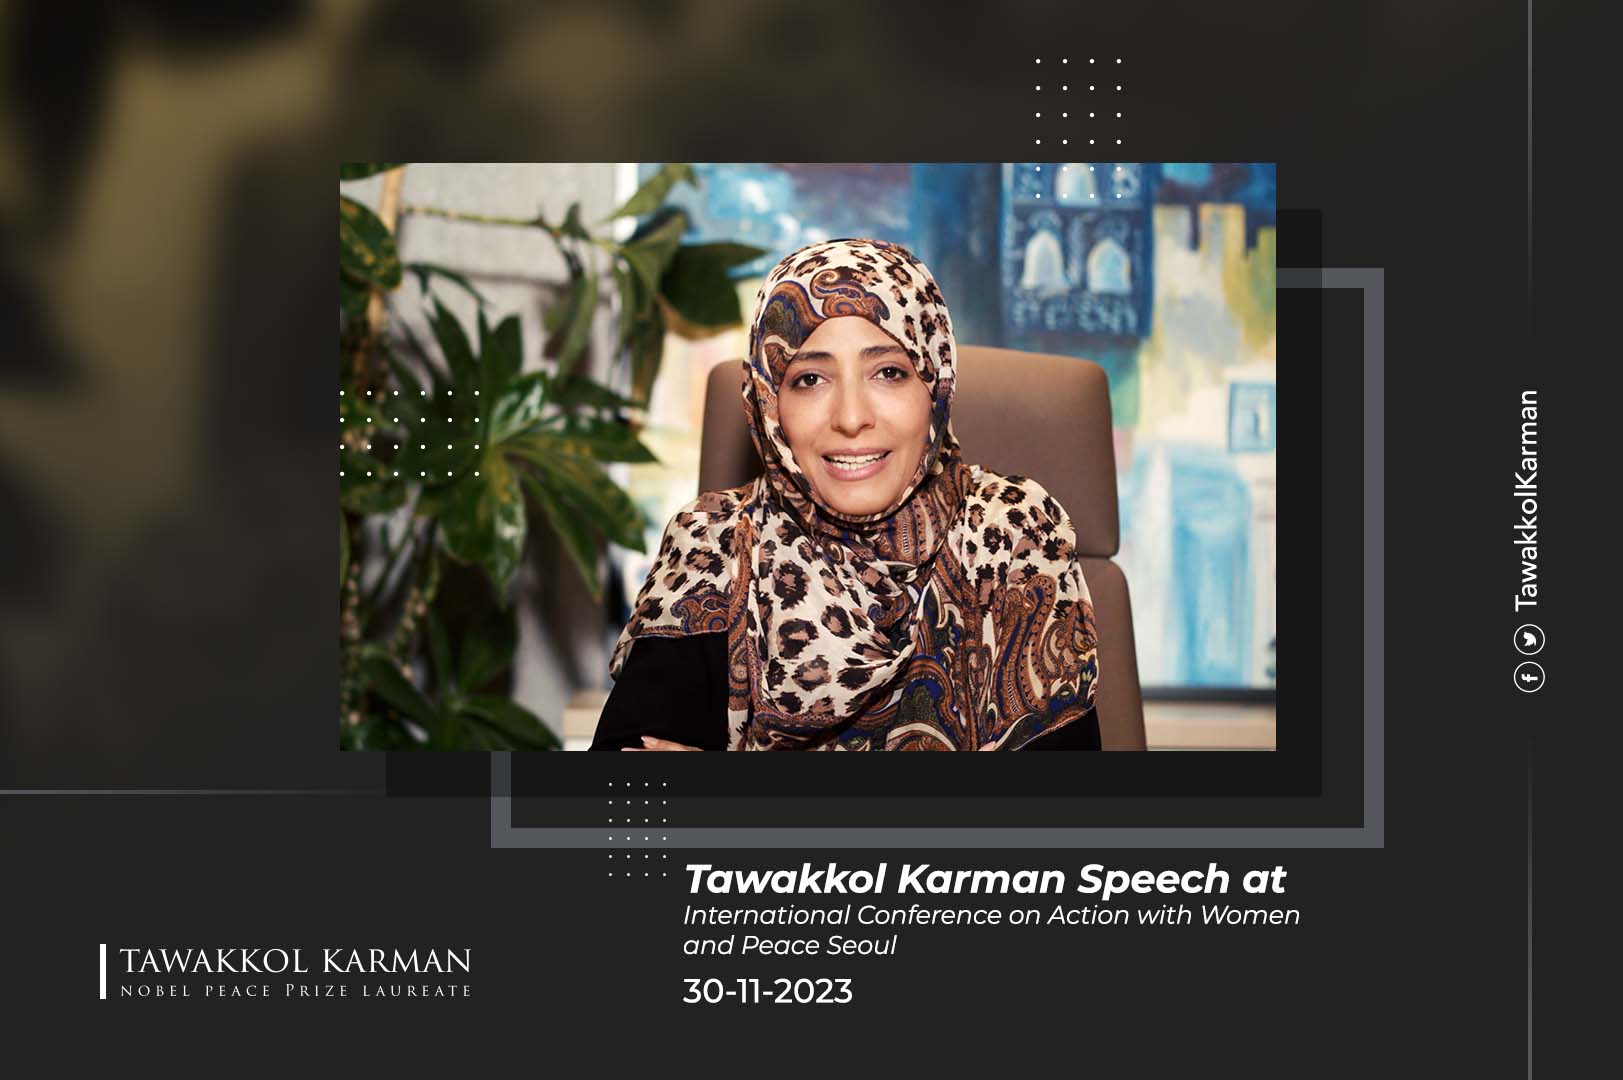 Tawakkol Karman Speech at International Conference on Action with Women and Peace Seoul